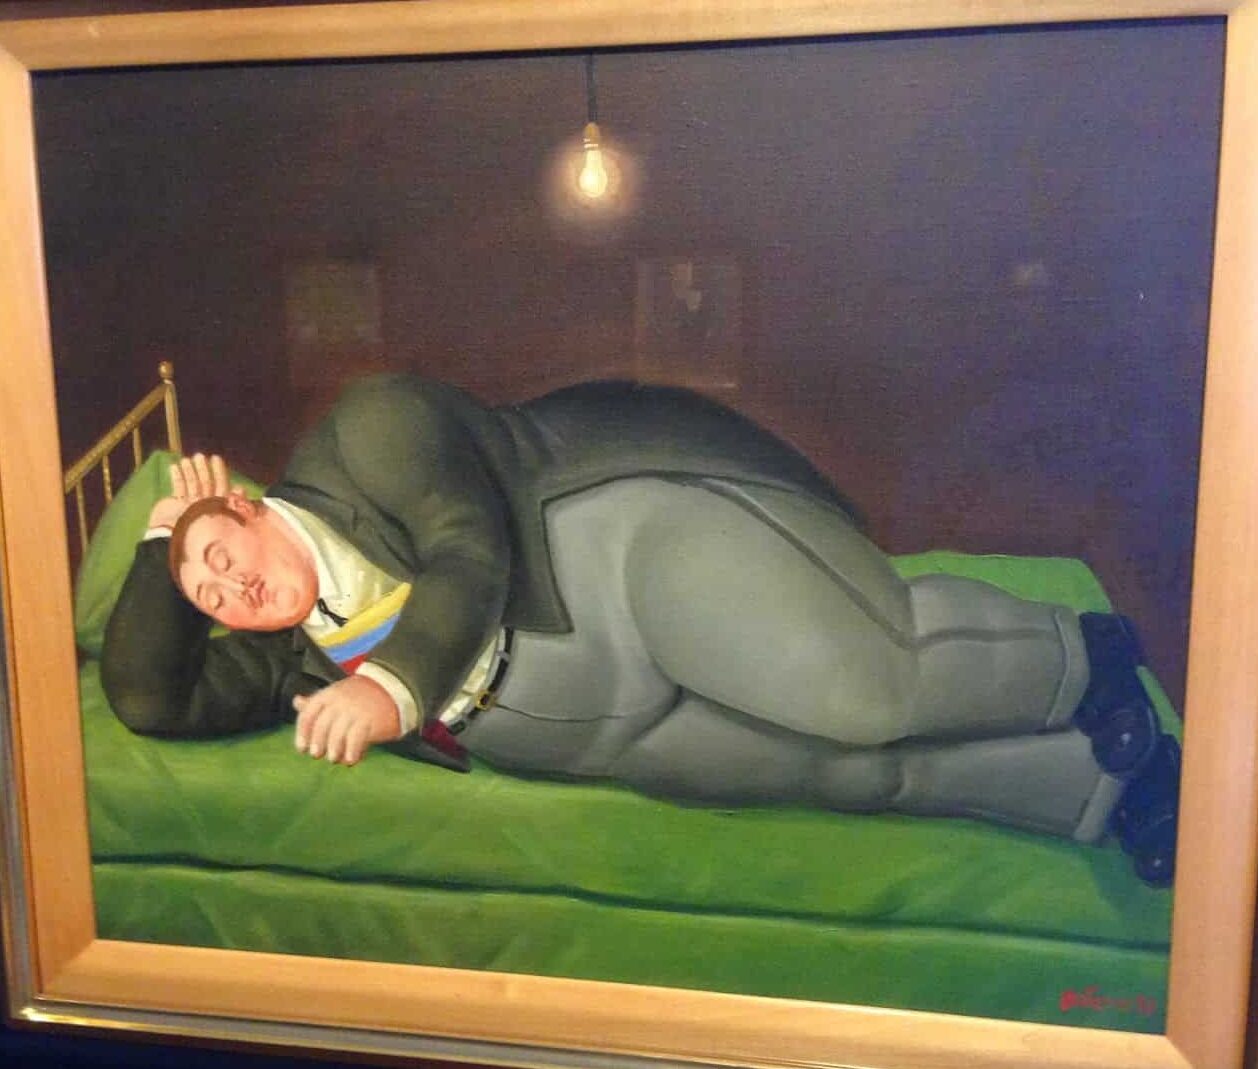 Sleeping politician painting at the Botero Museum in La Candelaria, Bogotá, Colombia